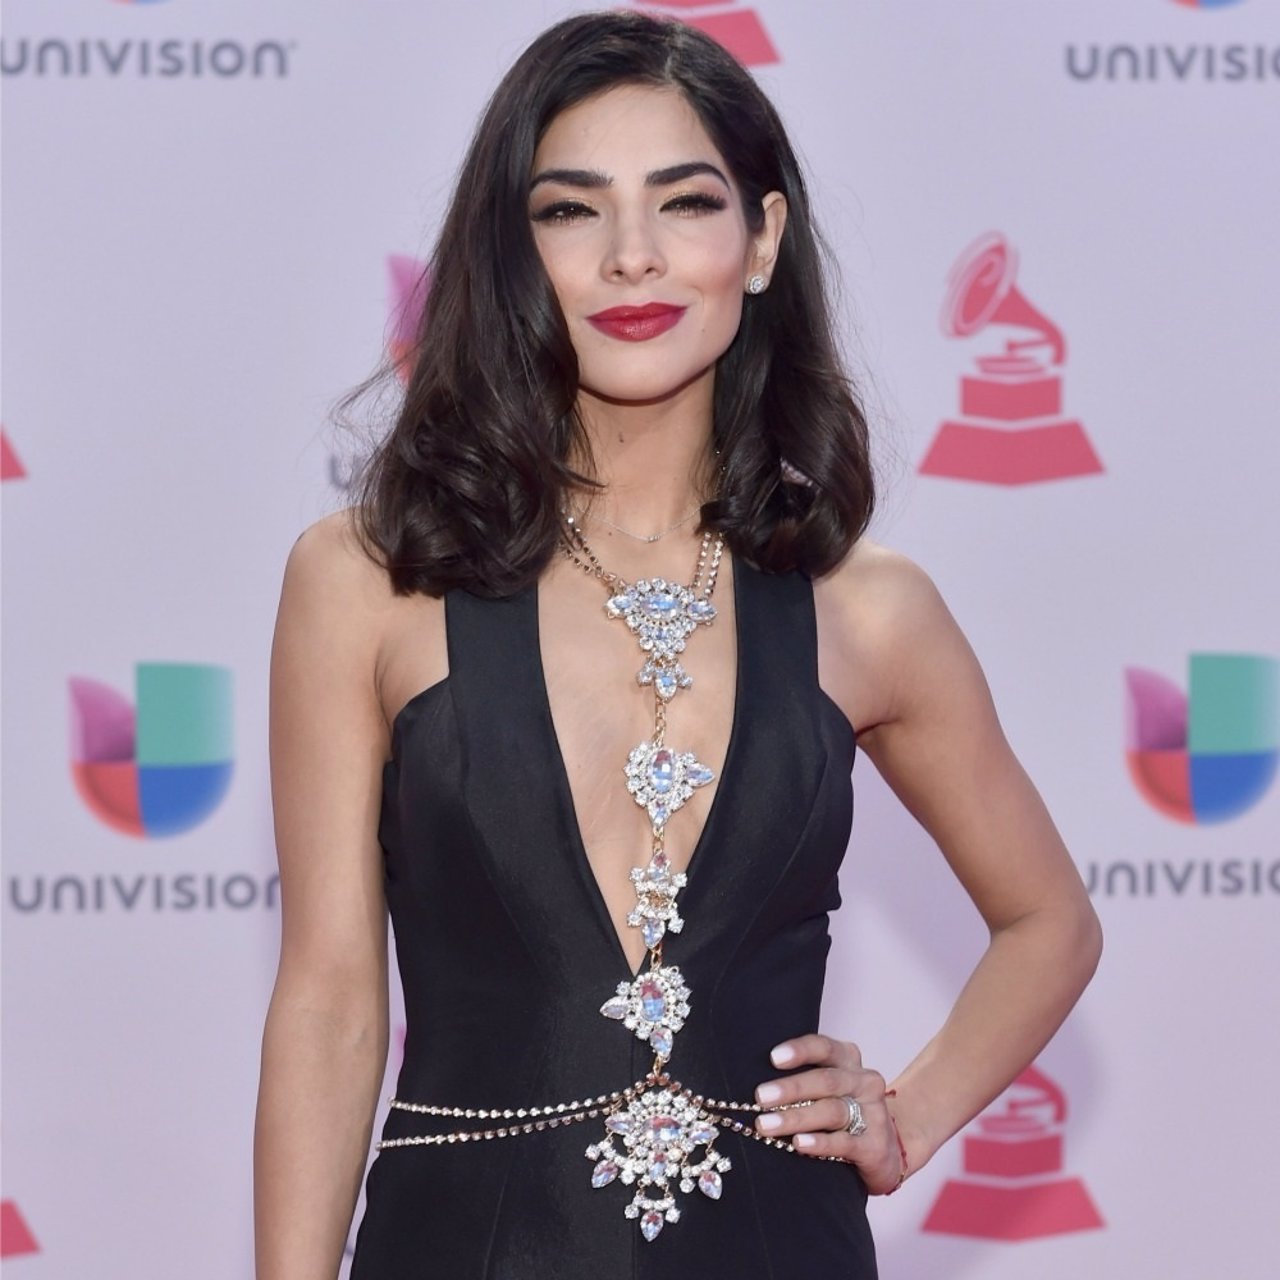 Attends the 16th Latin GRAMMY Awards at the MGM Grand Garden Arena on November 1